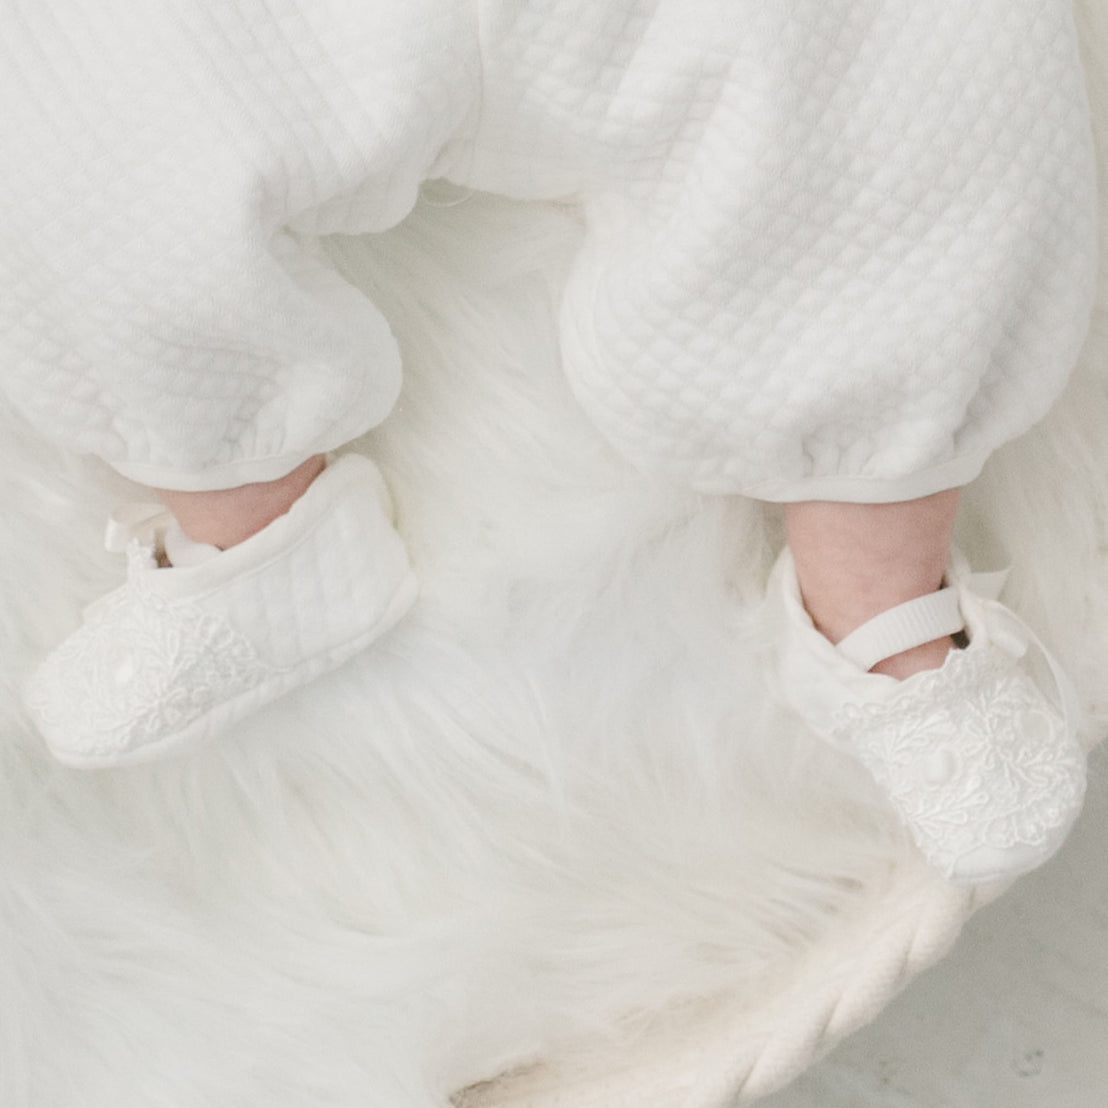 A close-up of a baby's feet wearing Madeline Quilted Booties and dressed in an upscale, textured onesie, resting on a soft white fur surface.